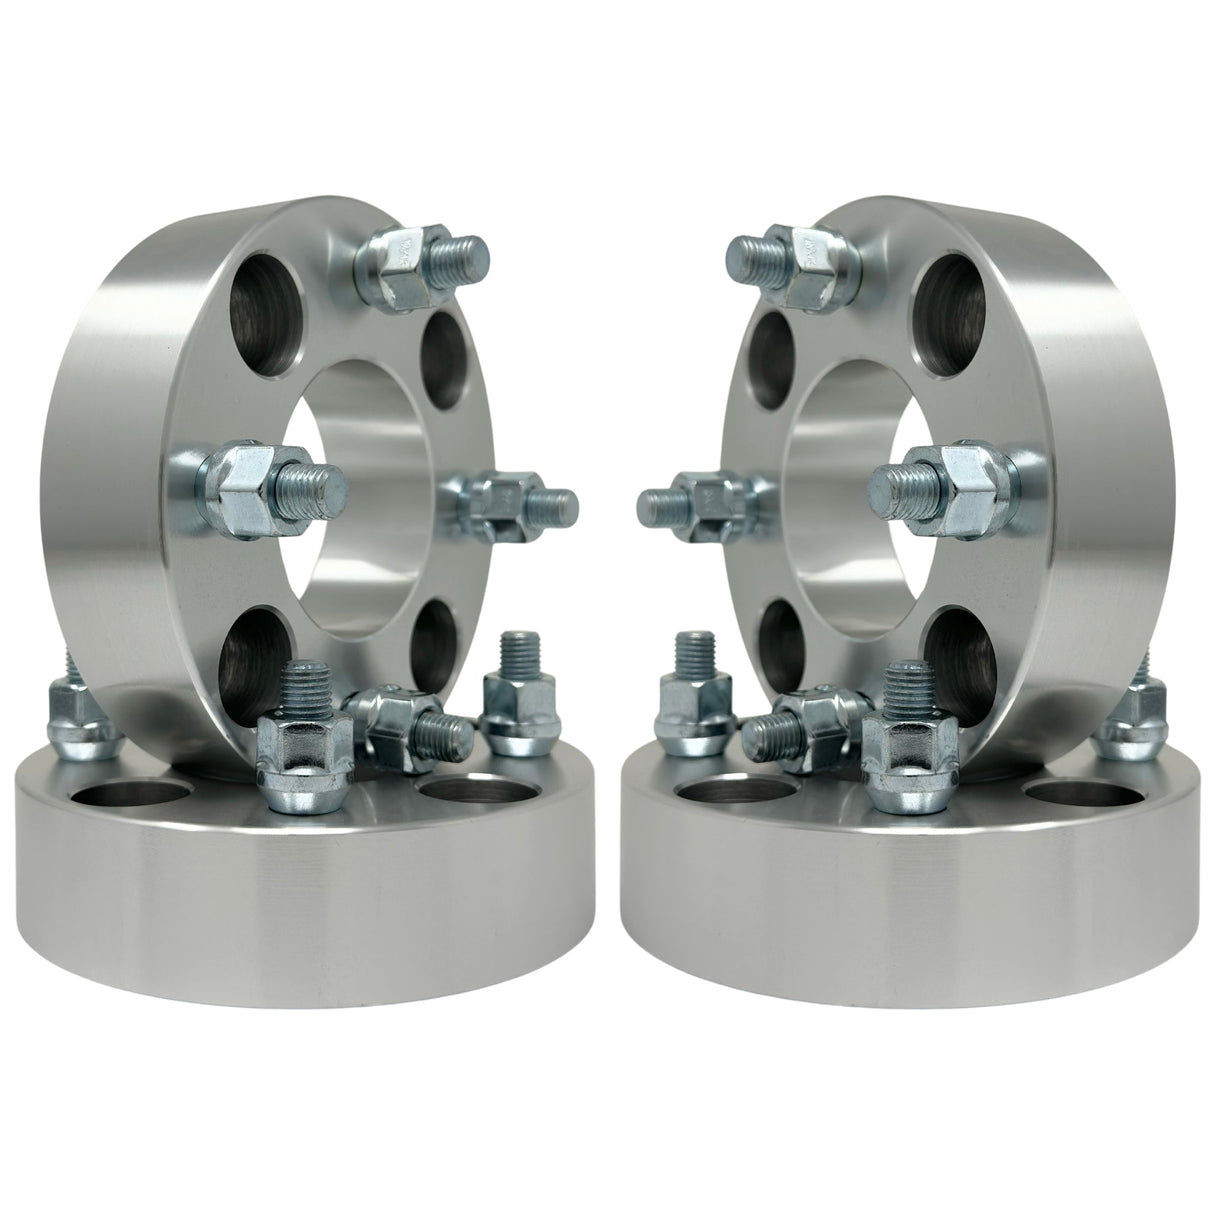 Cushman Truckster 4x3.75 To 4x4 Golf Cart Wheel Adapters / Spacers | 4x95 to 4x101.6 Wheel Spacers | 1" Inch or 1.25" Inch or 1.5" Inch or 2 Inch Thicknesses (25mm - 50mm) 1/2-20 Studs & Lug Nuts 71mm Center Bore For All 4x3.75 Vehicle Hub Clearance